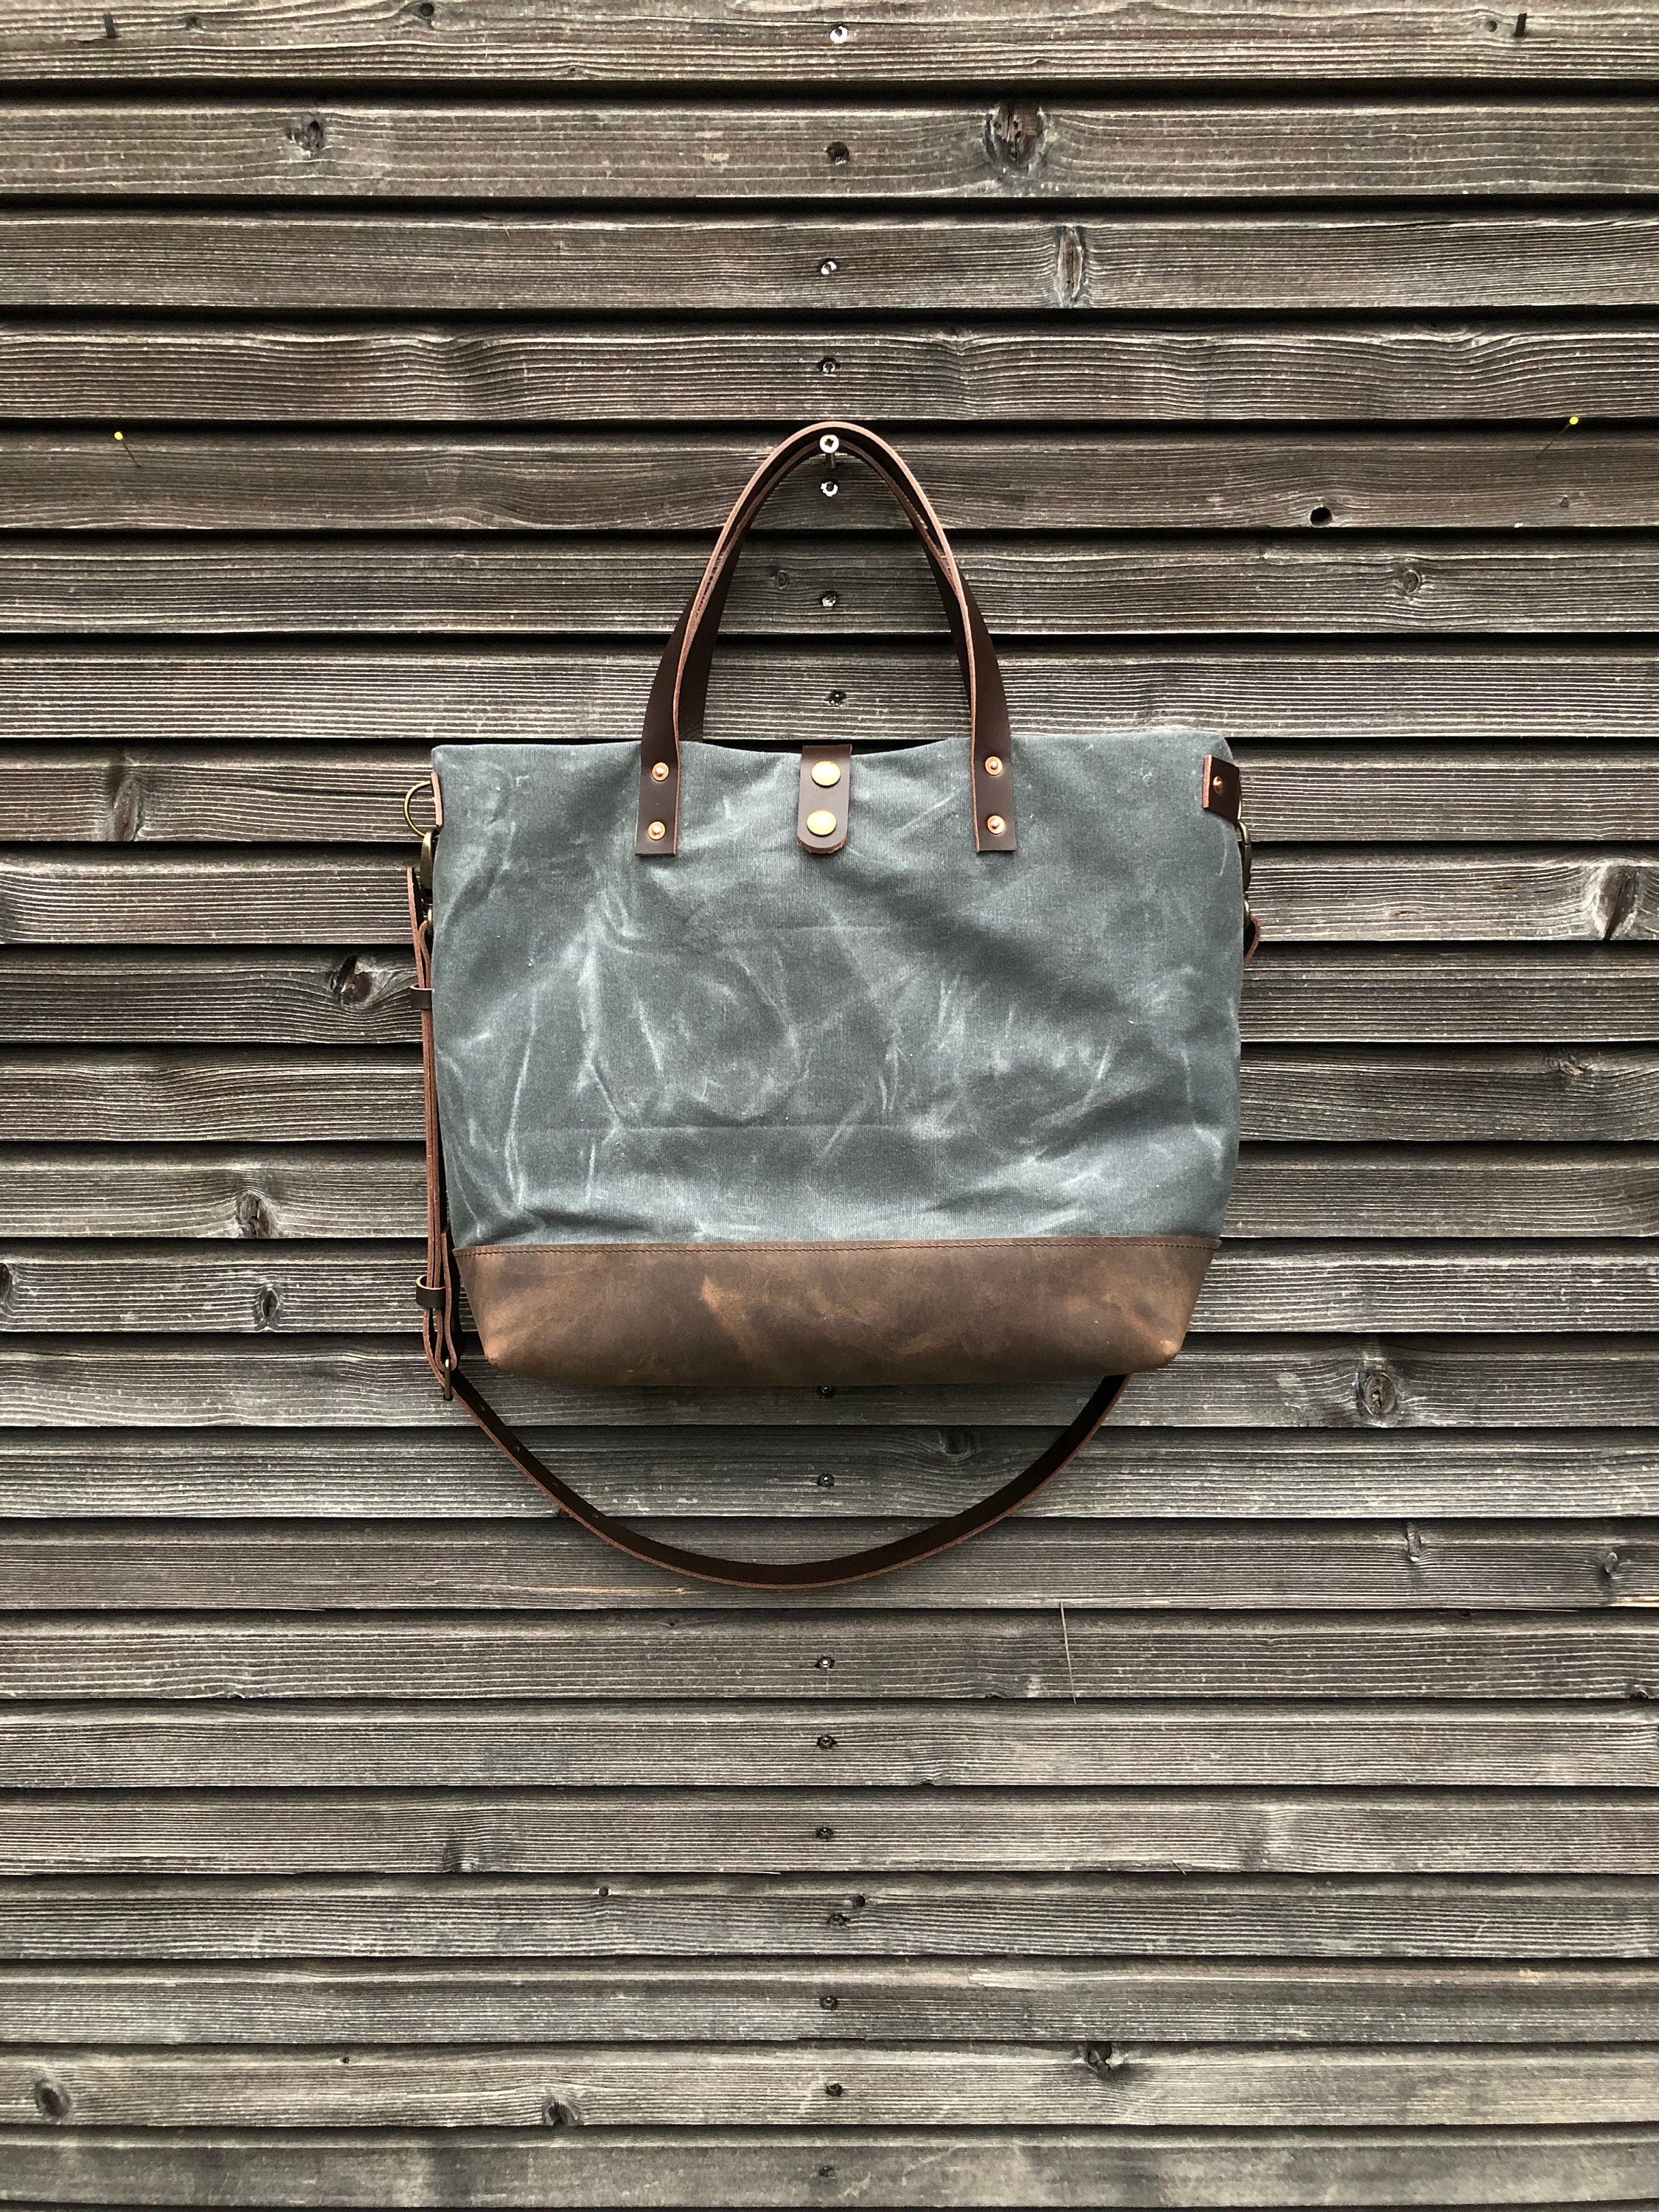 Black waxed canvas tote bag with leather bottom handles and cross